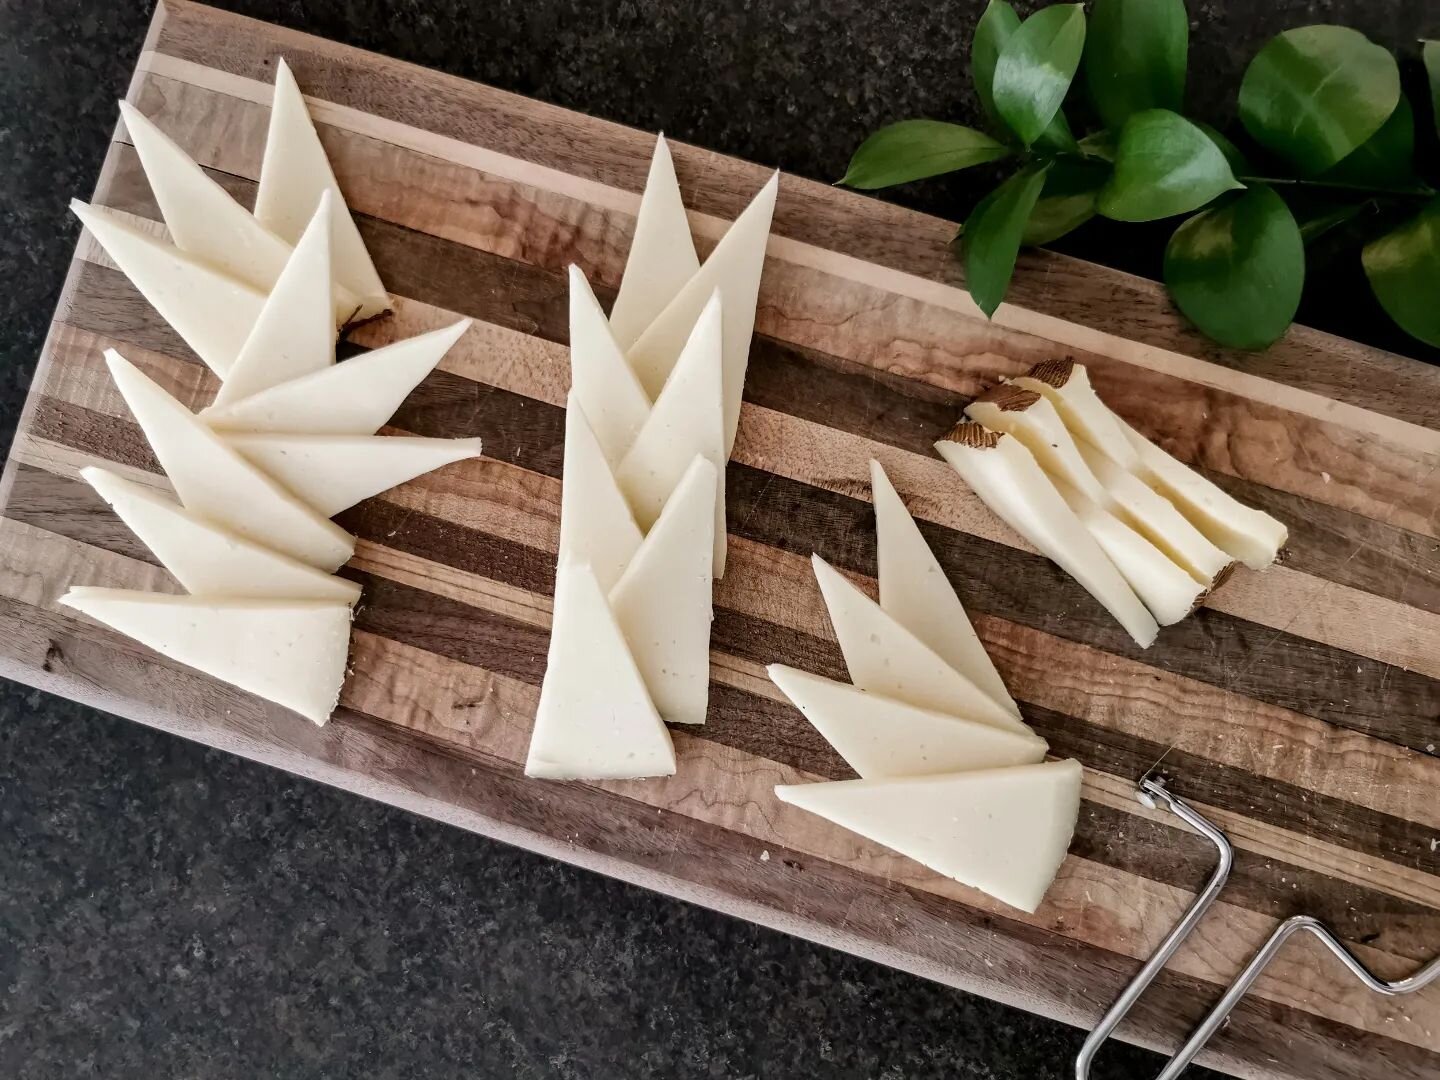 Four ways to style Manchego that will elevate any board! 

From left to right:
~Alternating Layered Fan
~Dragons Tail
~Fan
~Zipper or Stack

#justgraze #stylingmanchego #manchegozipper #manchegofan #manchegodragonstail #cheesetutorial #stylingcheese 